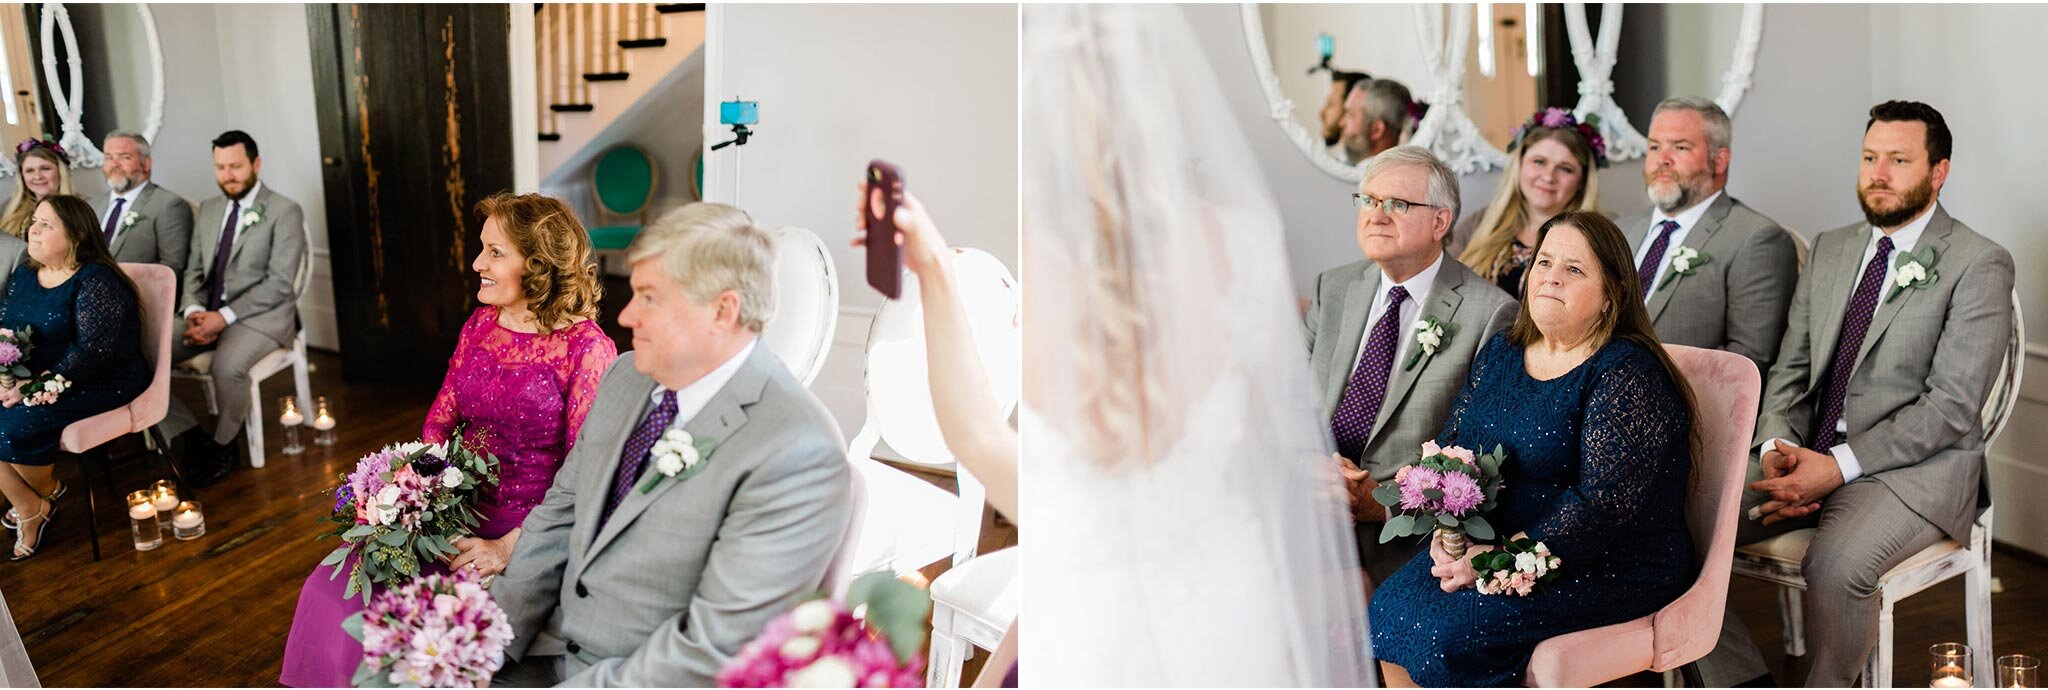 Durham Wedding Photographer | By G. Lin Photography | Wedding guests sitting during ceremony